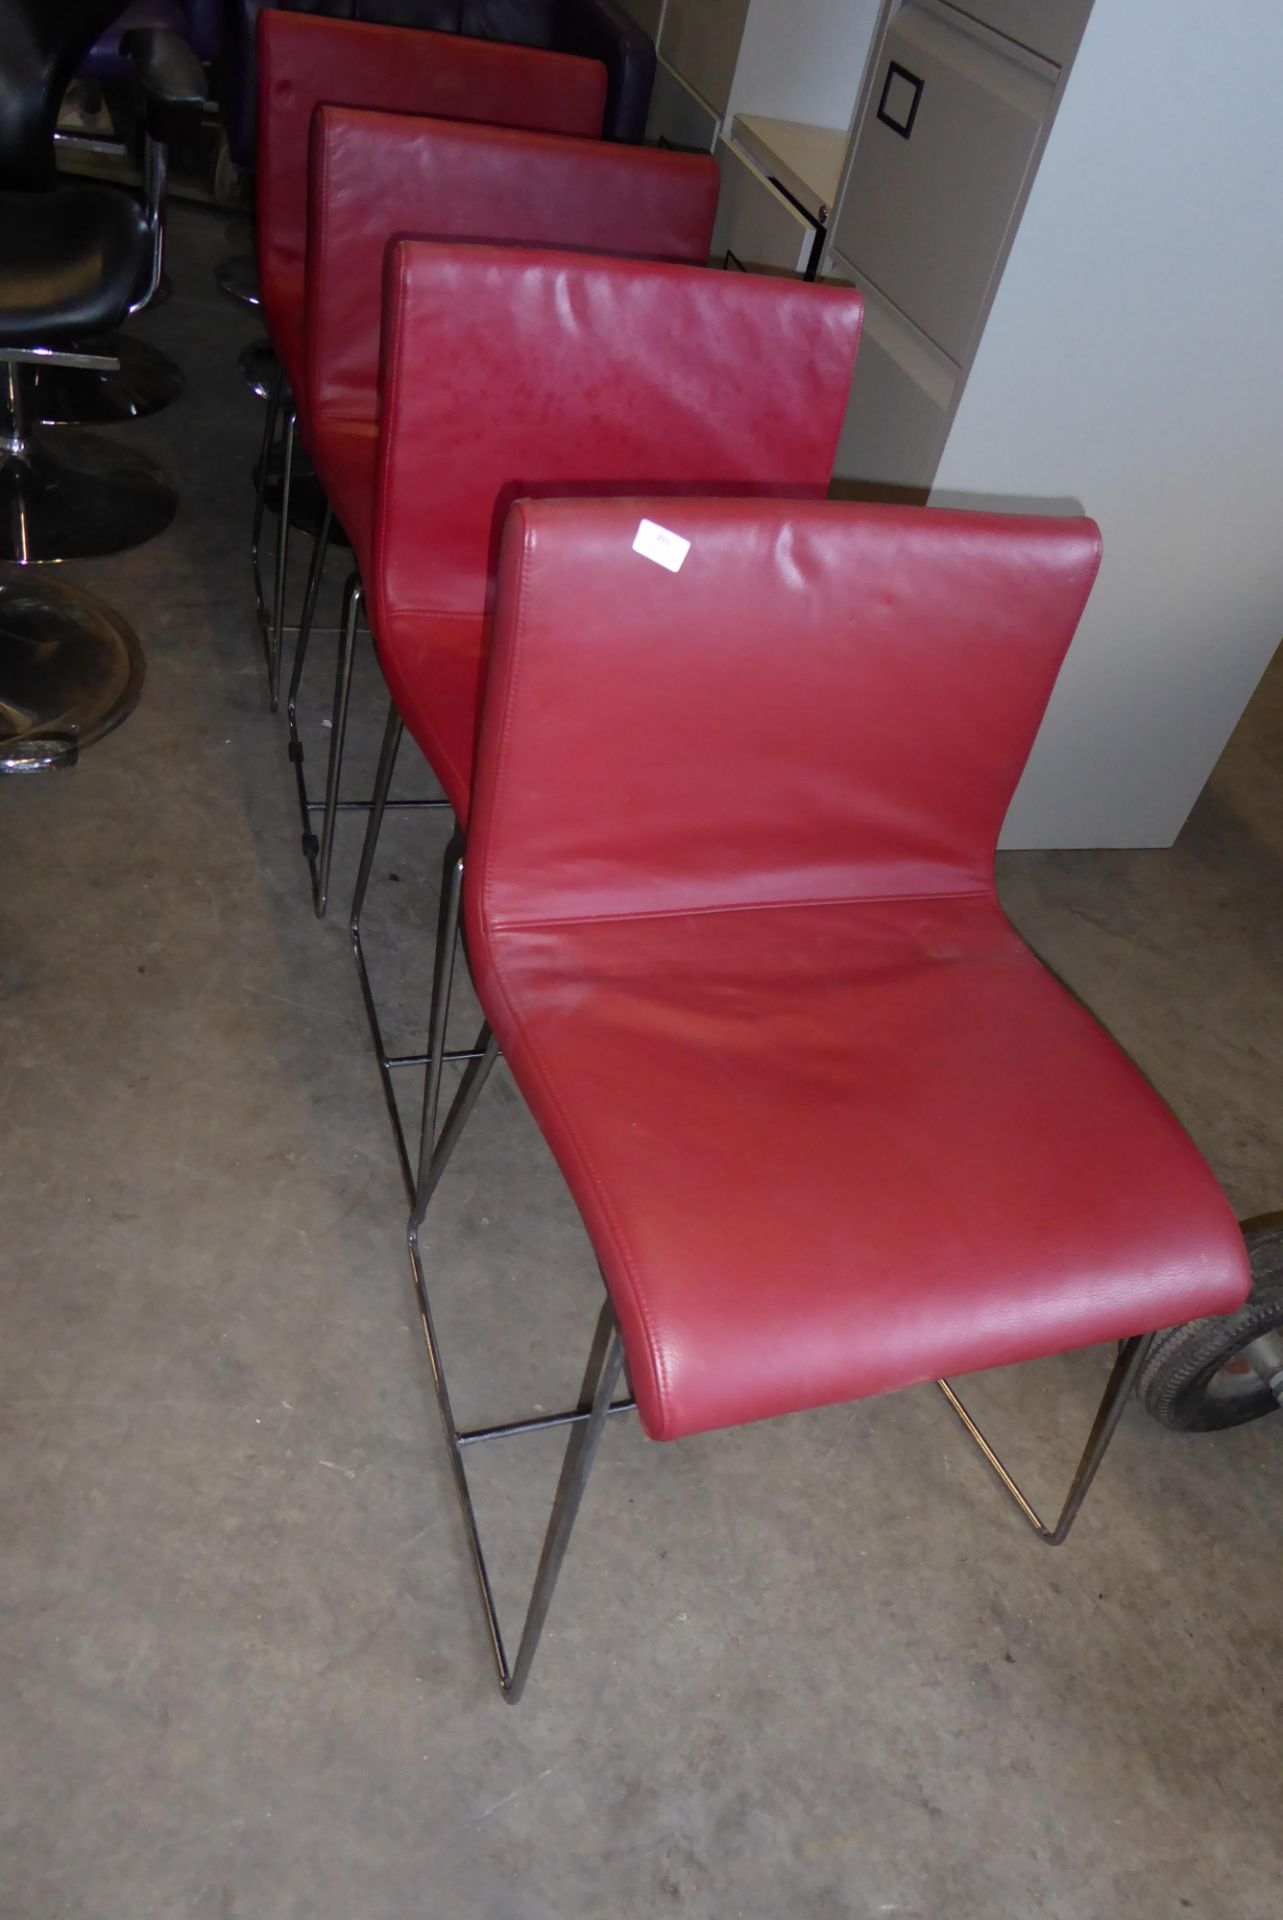 * 4 x chrome framed red upholstered leatherette chairs